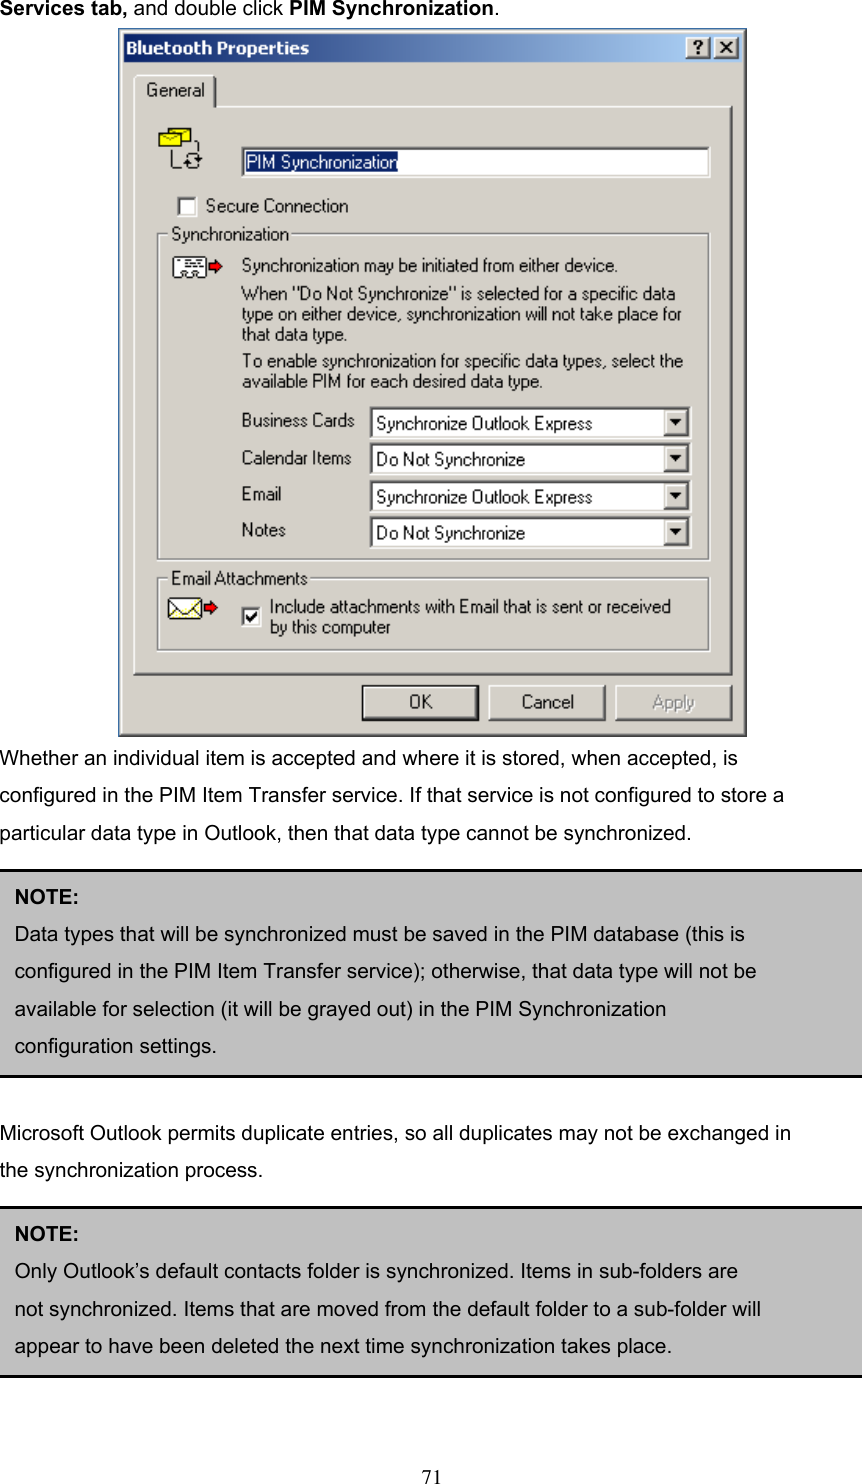 Services tab, and double click PIM Synchronization.  Whether an individual item is accepted and where it is stored, when accepted, is configured in the PIM Item Transfer service. If that service is not configured to store a particular data type in Outlook, then that data type cannot be synchronized.        NOTE:  Data types that will be synchronized must be saved in the PIM database (this is configured in the PIM Item Transfer service); otherwise, that data type will not be available for selection (it will be grayed out) in the PIM Synchronization configuration settings. Microsoft Outlook permits duplicate entries, so all duplicates may not be exchanged in the synchronization process.       NOTE:  Only Outlook’s default contacts folder is synchronized. Items in sub-folders are not synchronized. Items that are moved from the default folder to a sub-folder will appear to have been deleted the next time synchronization takes place.  71 